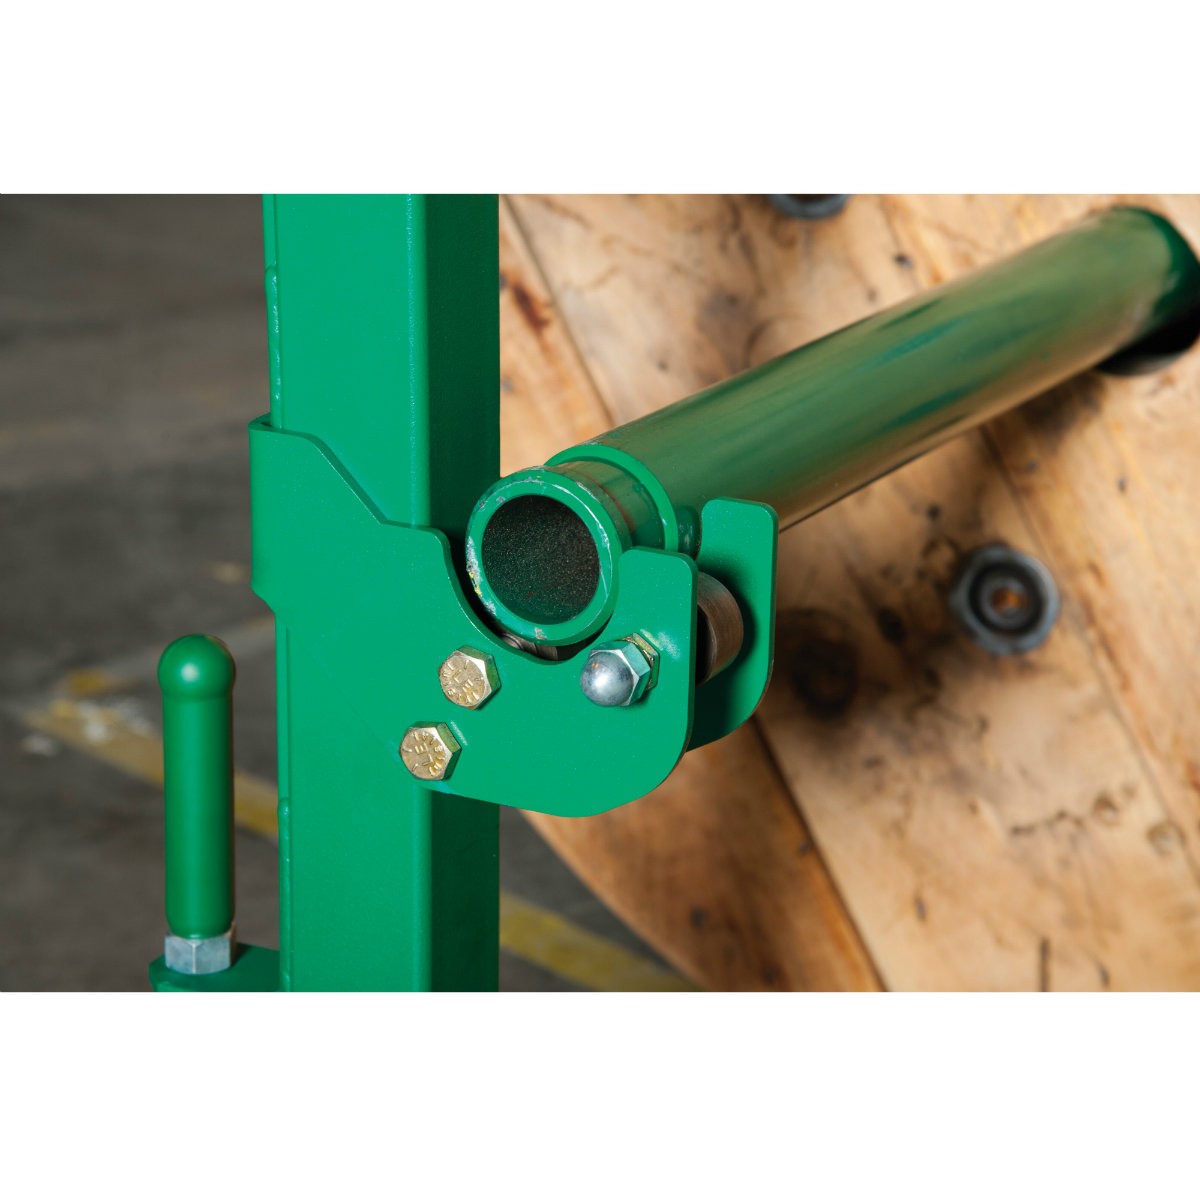 Greenlee RXM Reel Stand